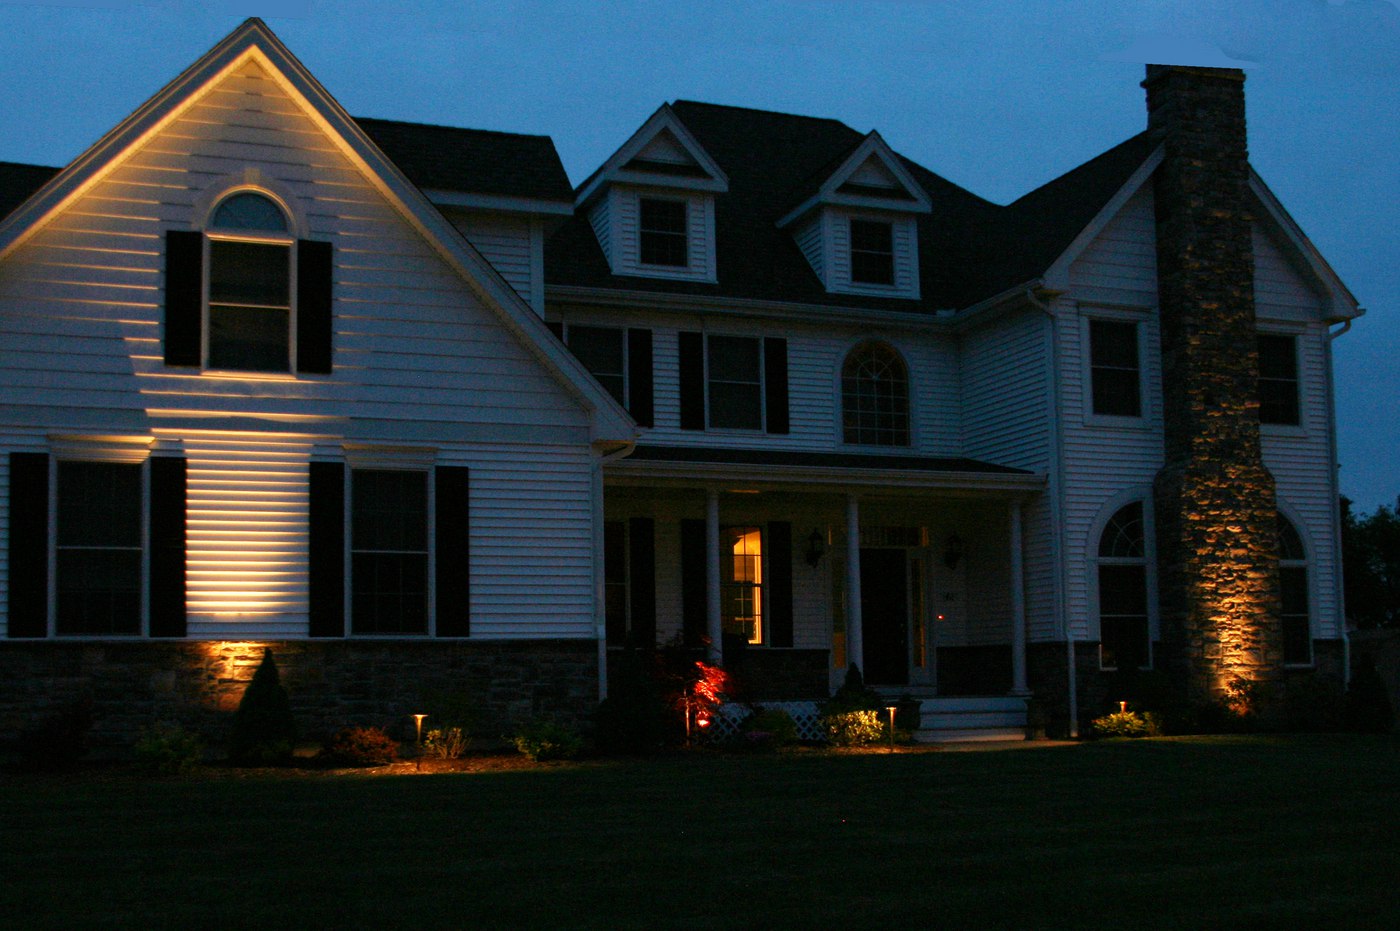 landscape lighting on the front of home